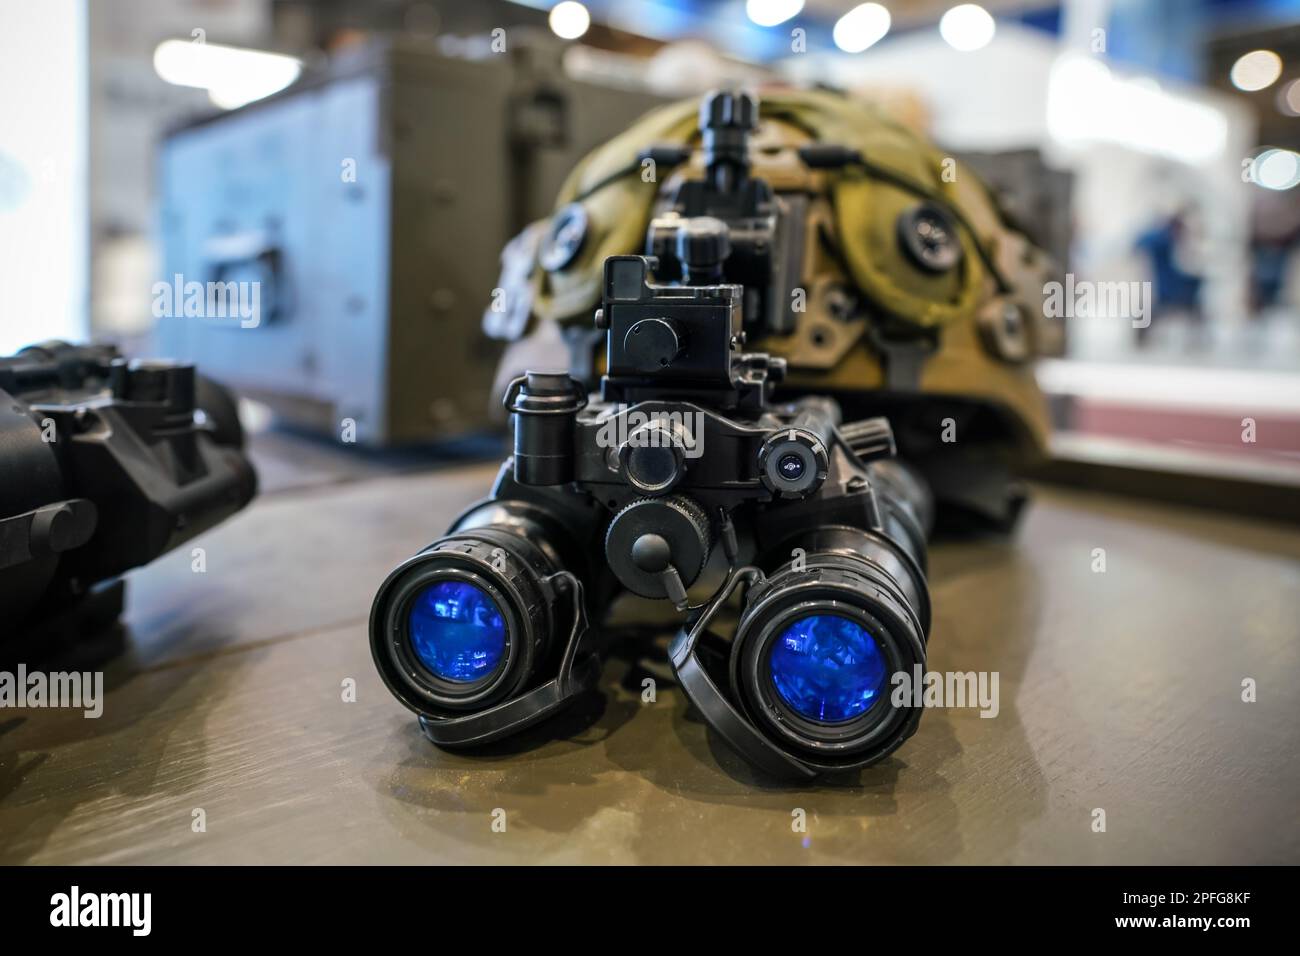 Night vision goggles on military helmet, closeup detail to blue reflective lenses Stock Photo